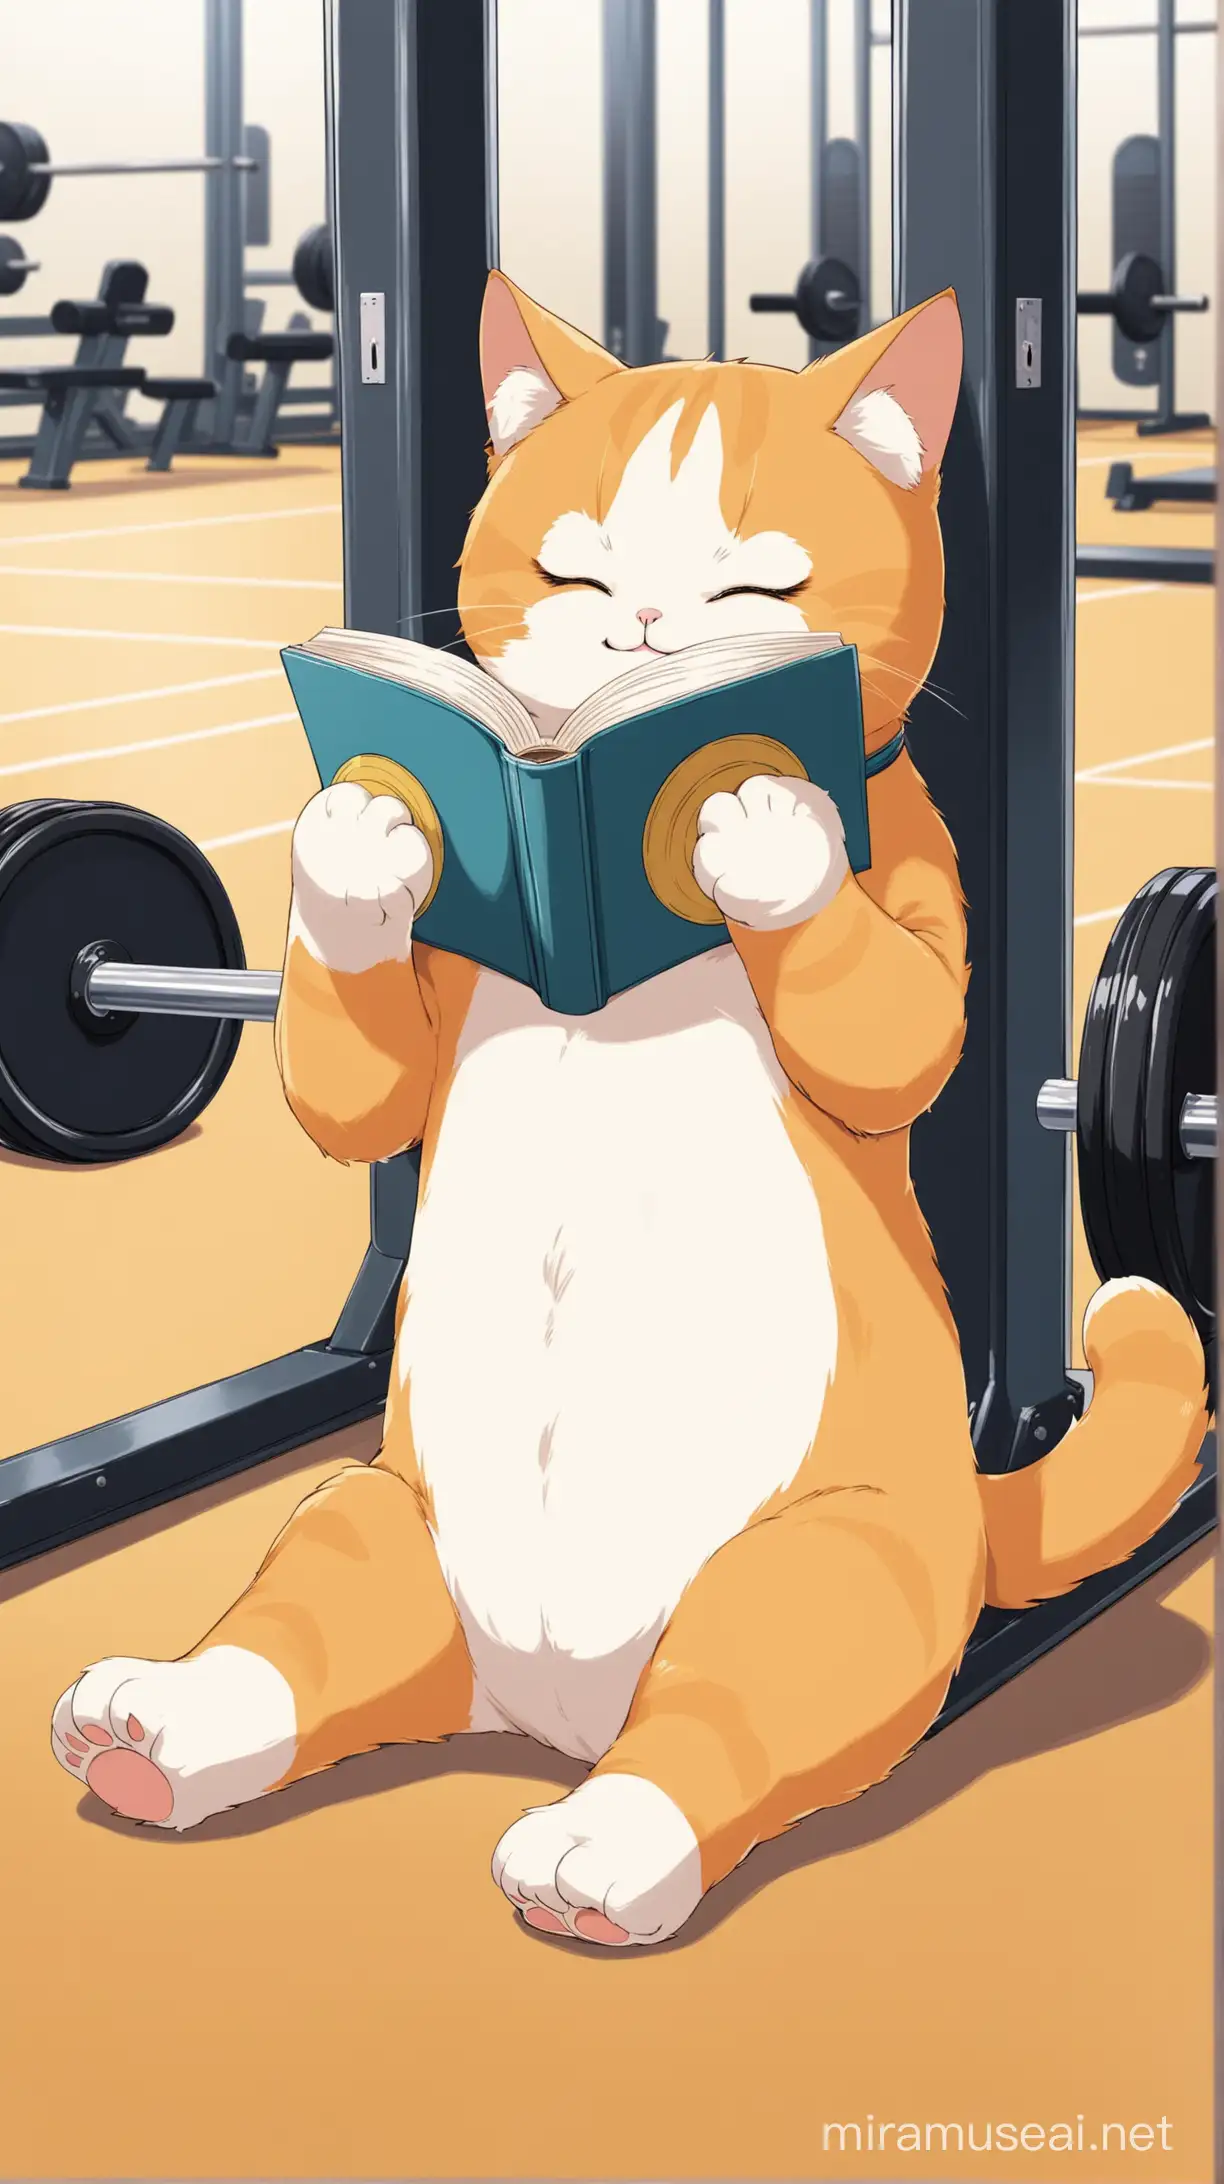 A cat reading one piece in a gym